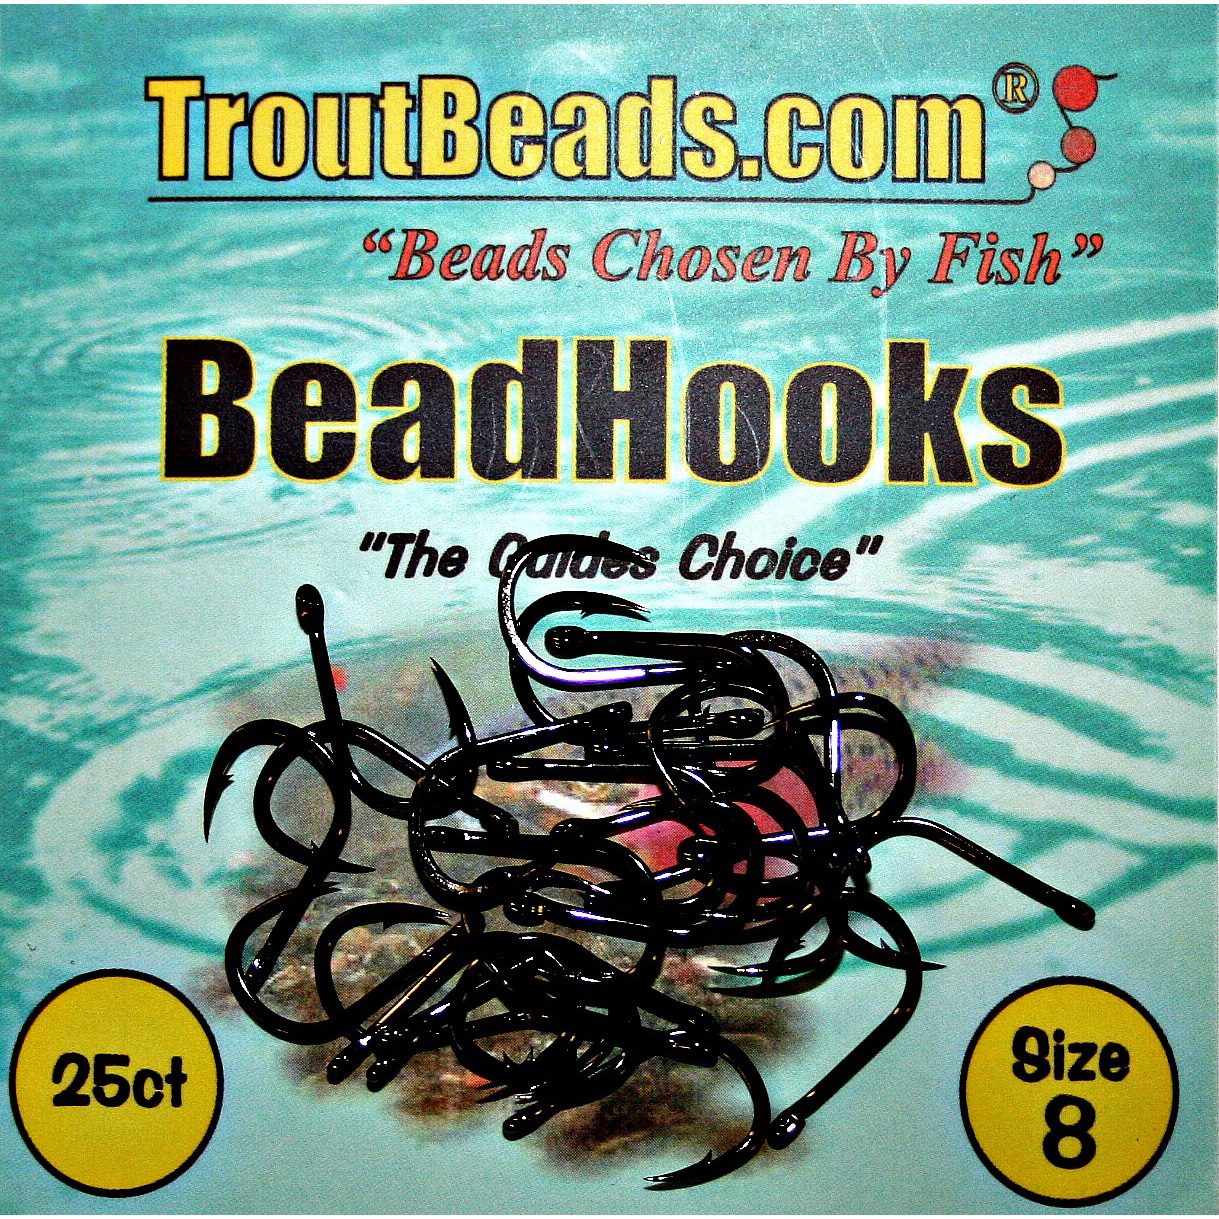 SIZE 6 TROUTBEADS HOOK 25 HOOKS PER PACK **NEW**